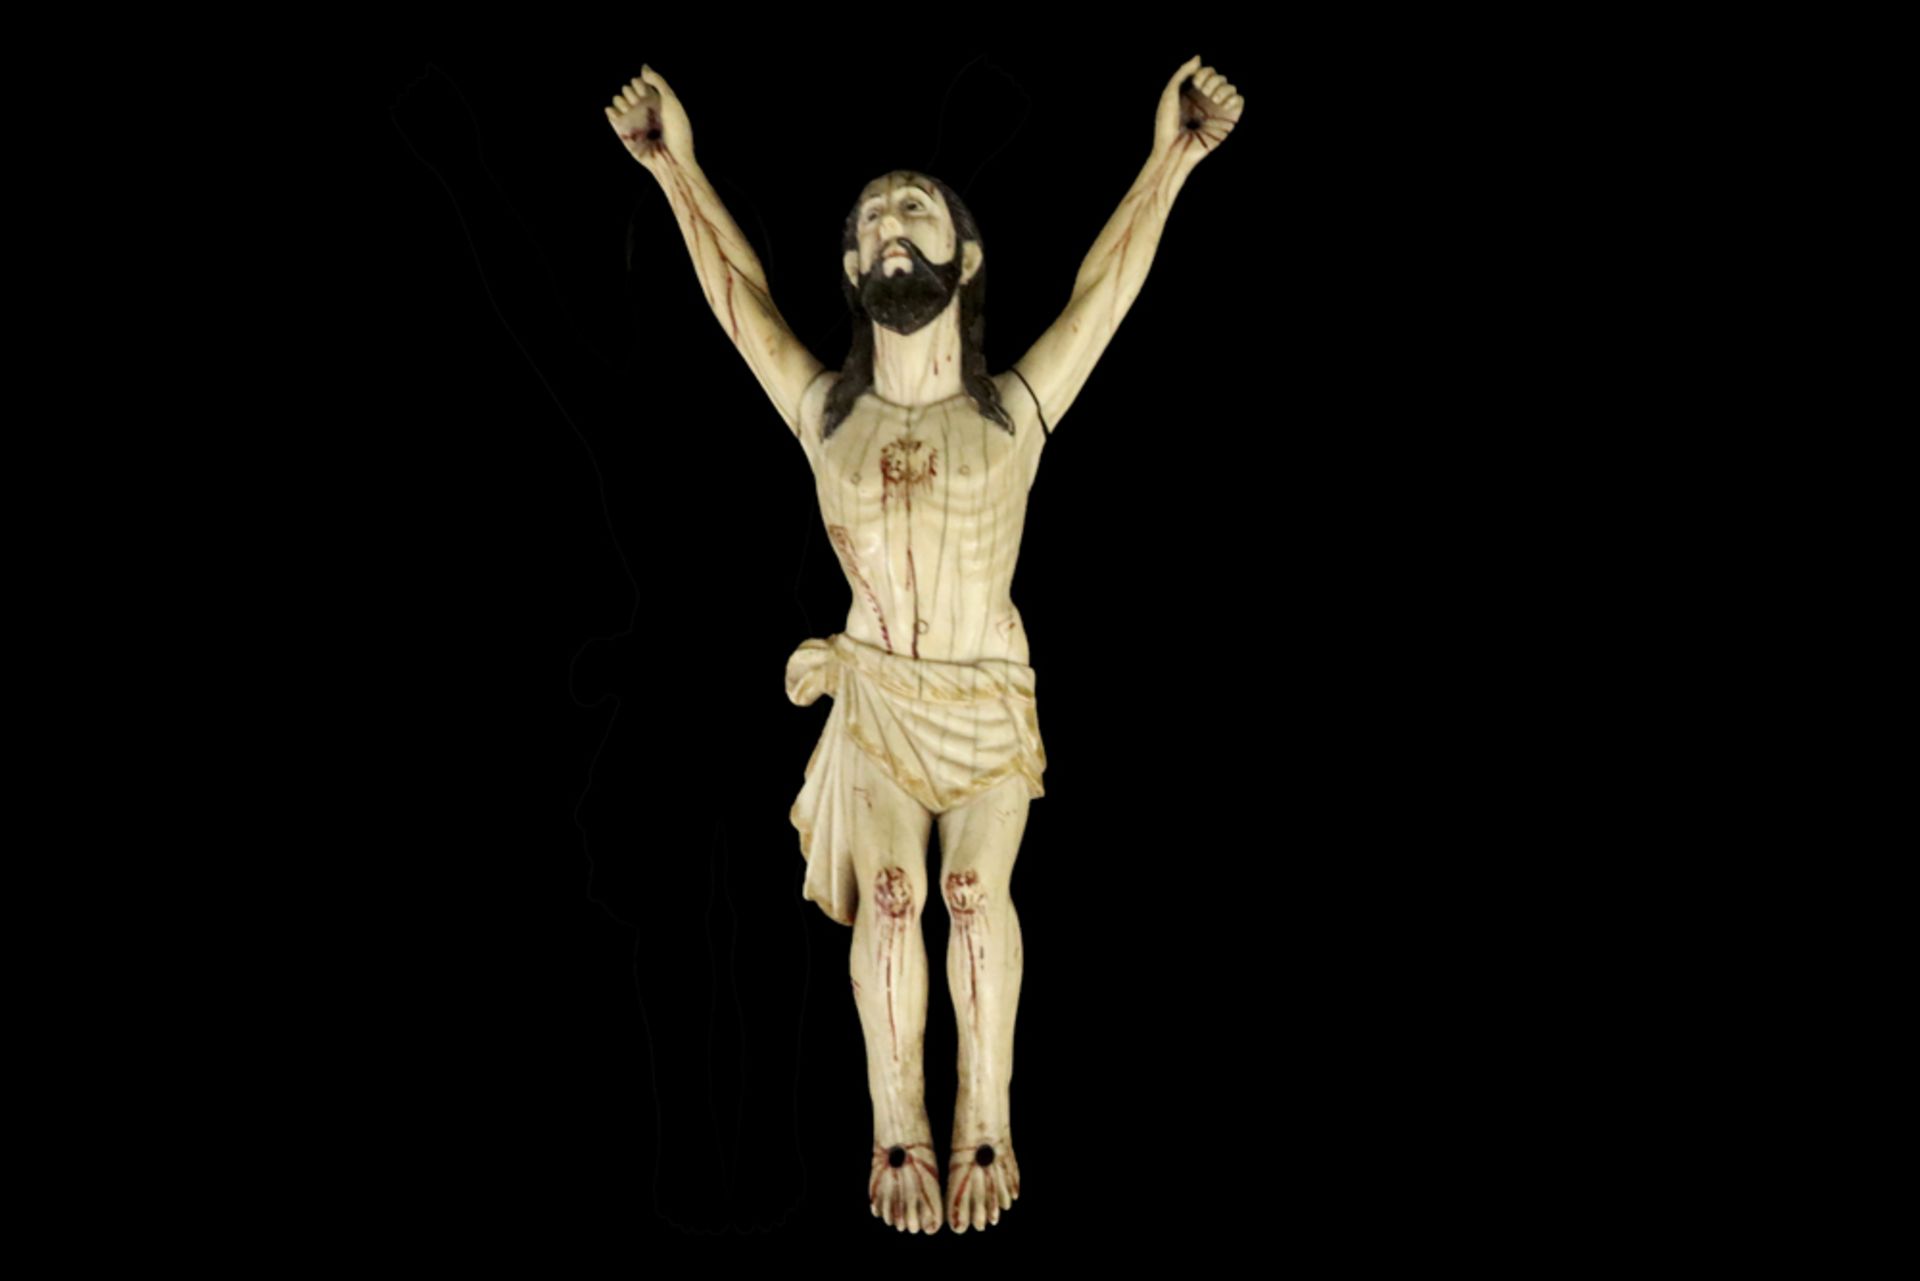 antique Indo-Portuguese (Goa) Christ corpus sculpture in ivory with remains of the original